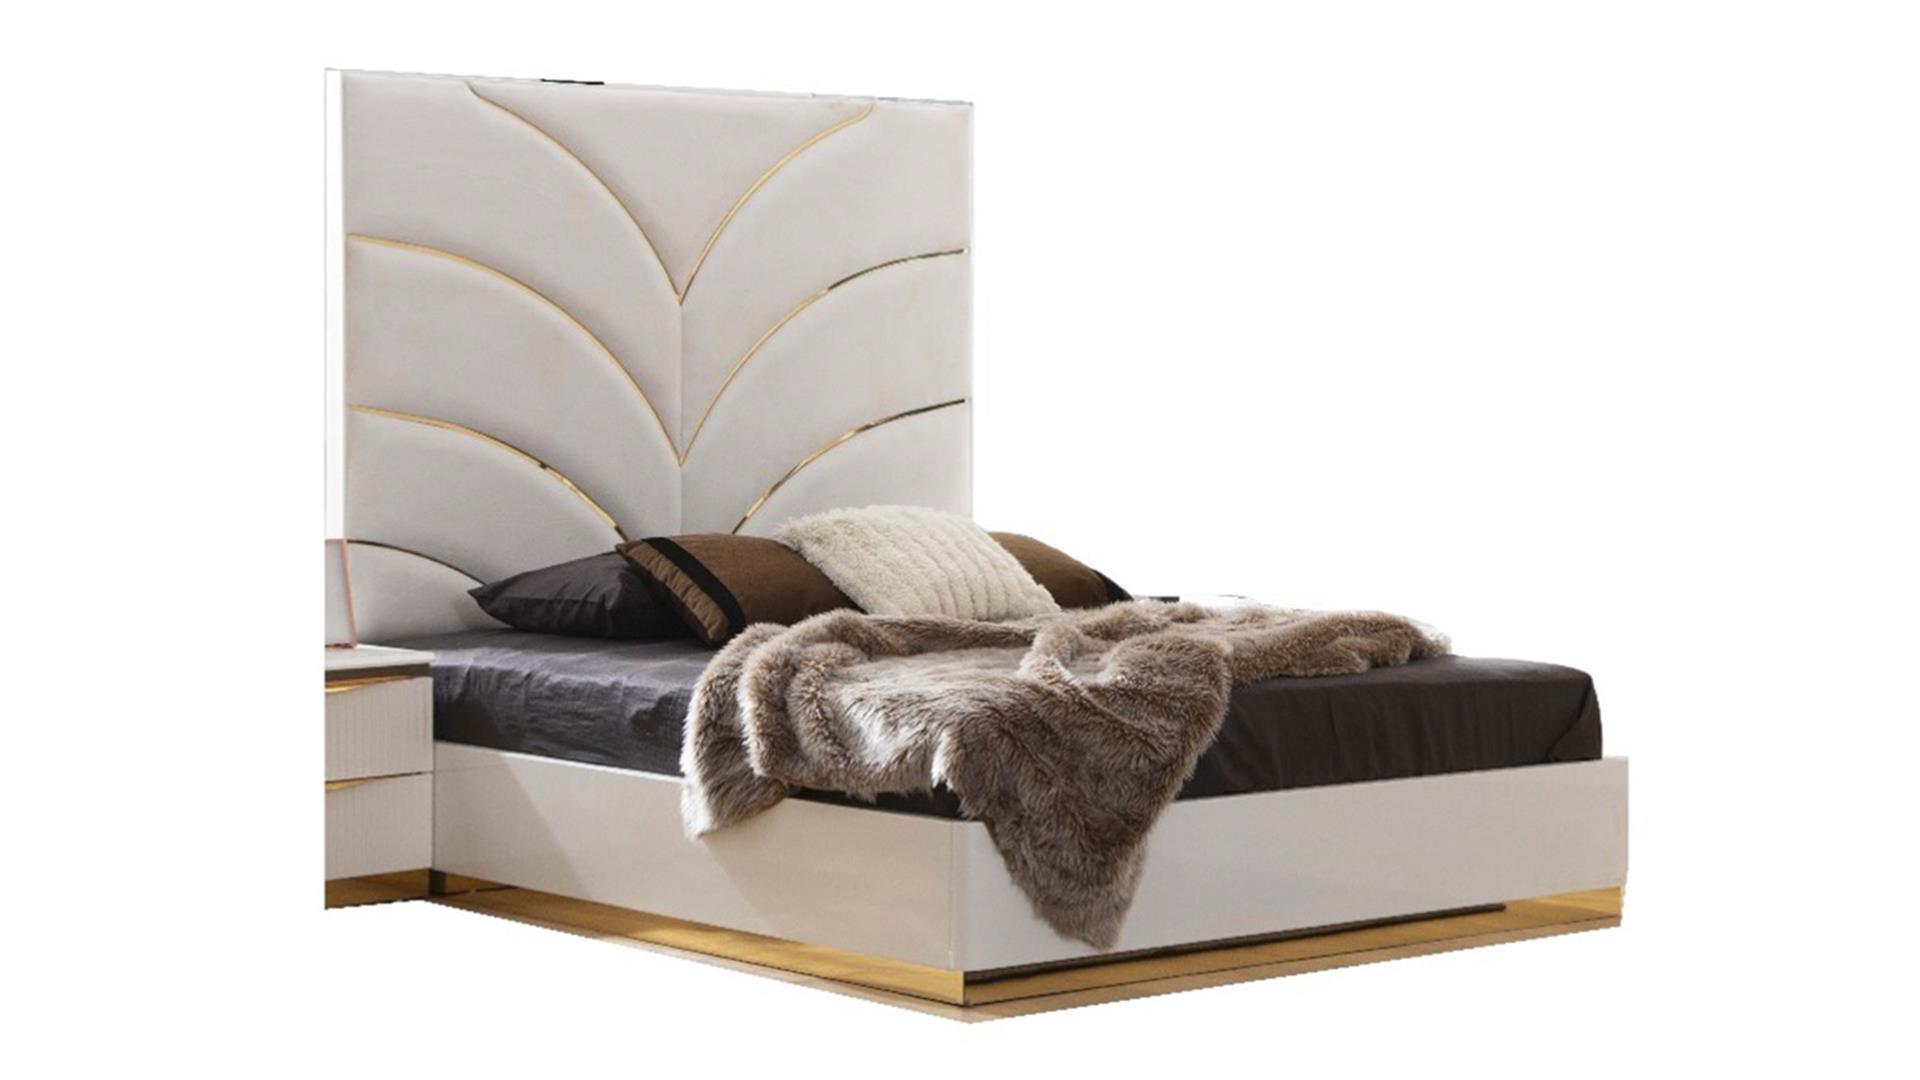 

    
Glam White & Gold Queen Bed LAURA Galaxy Home Contemporary Luxury
